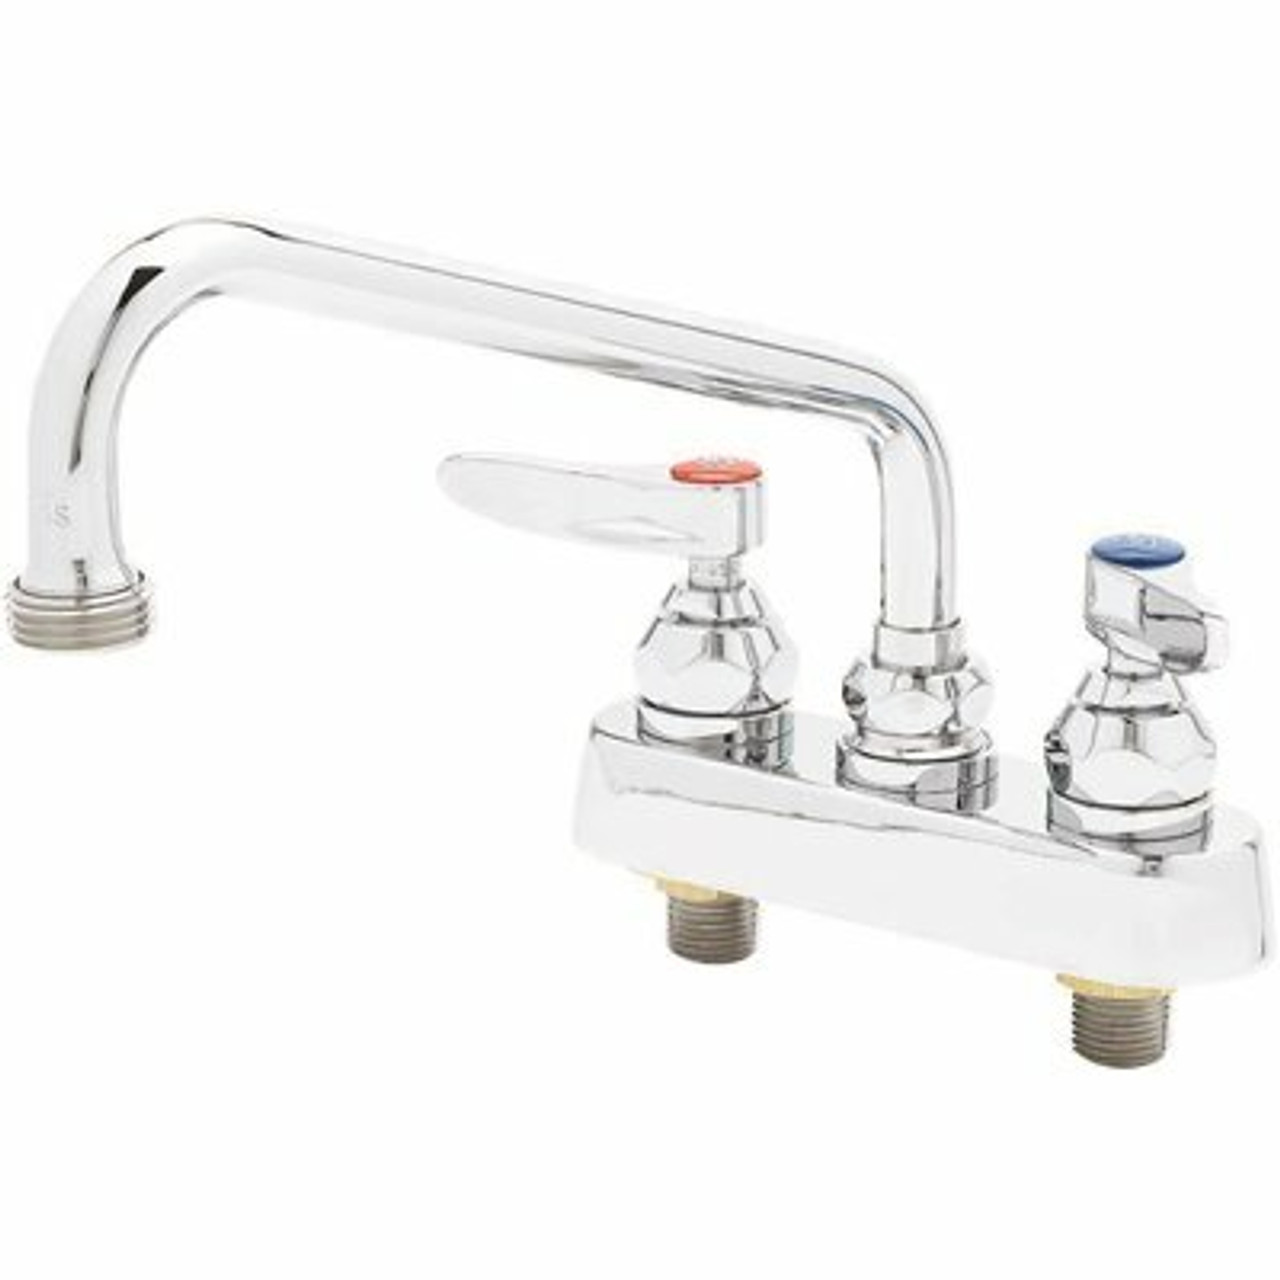 T&S Commercial 2-Handle Bar Faucet With Lever Handles And In Polished Chrome